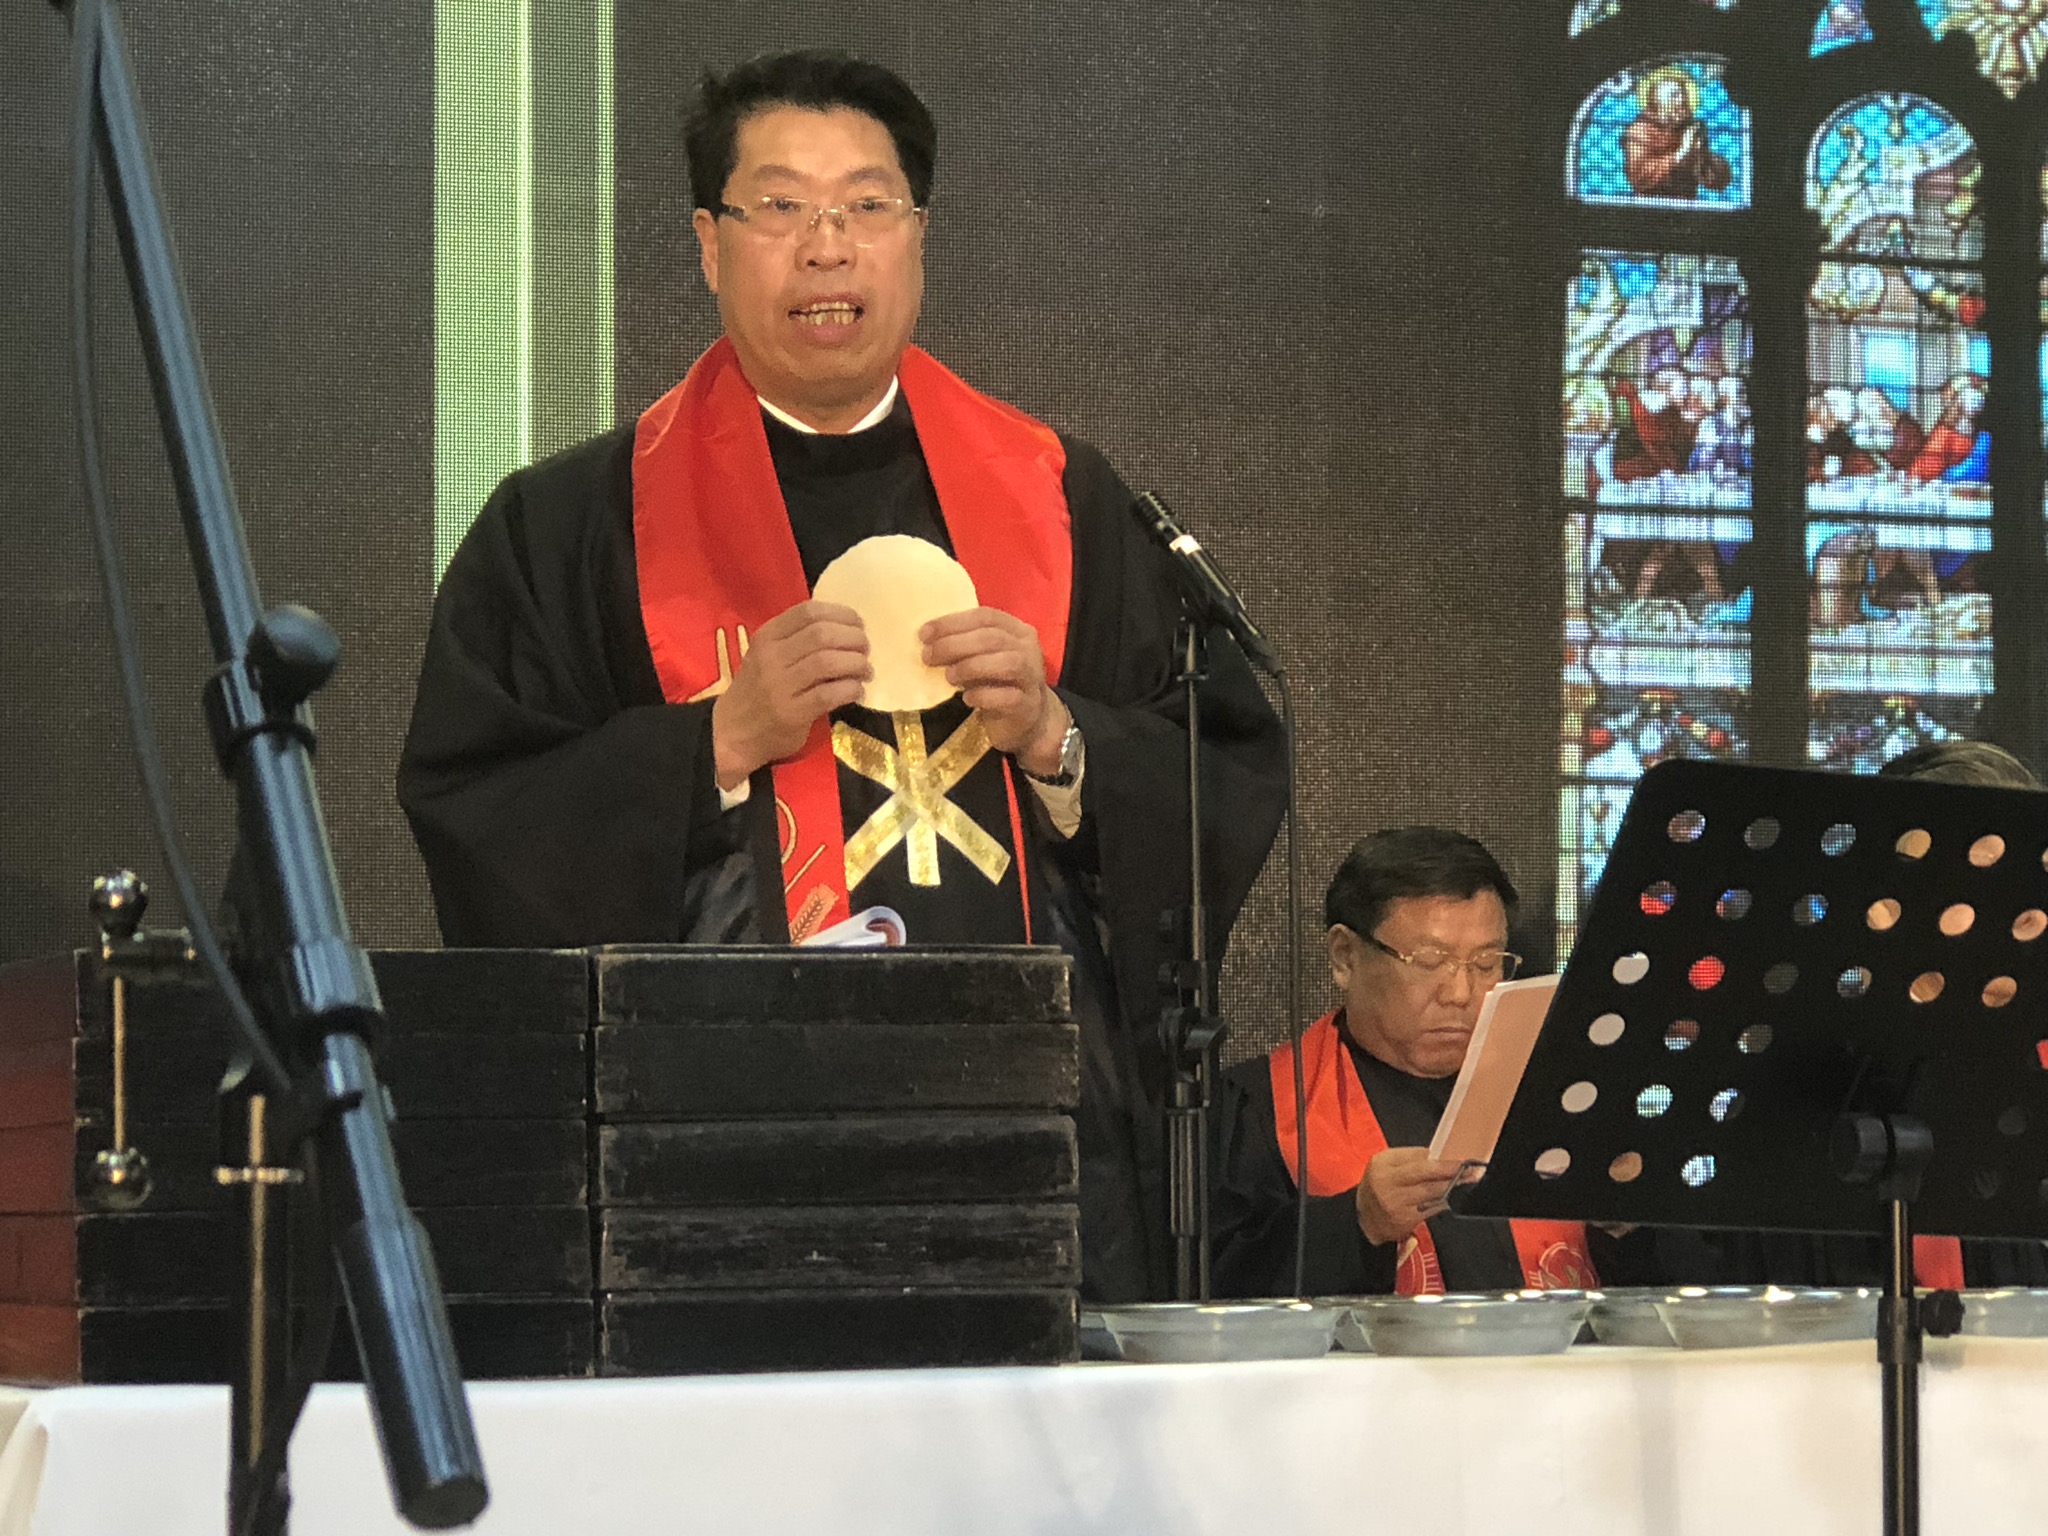  Rev. Zhang, Provincial Chairman, officiating over communion  